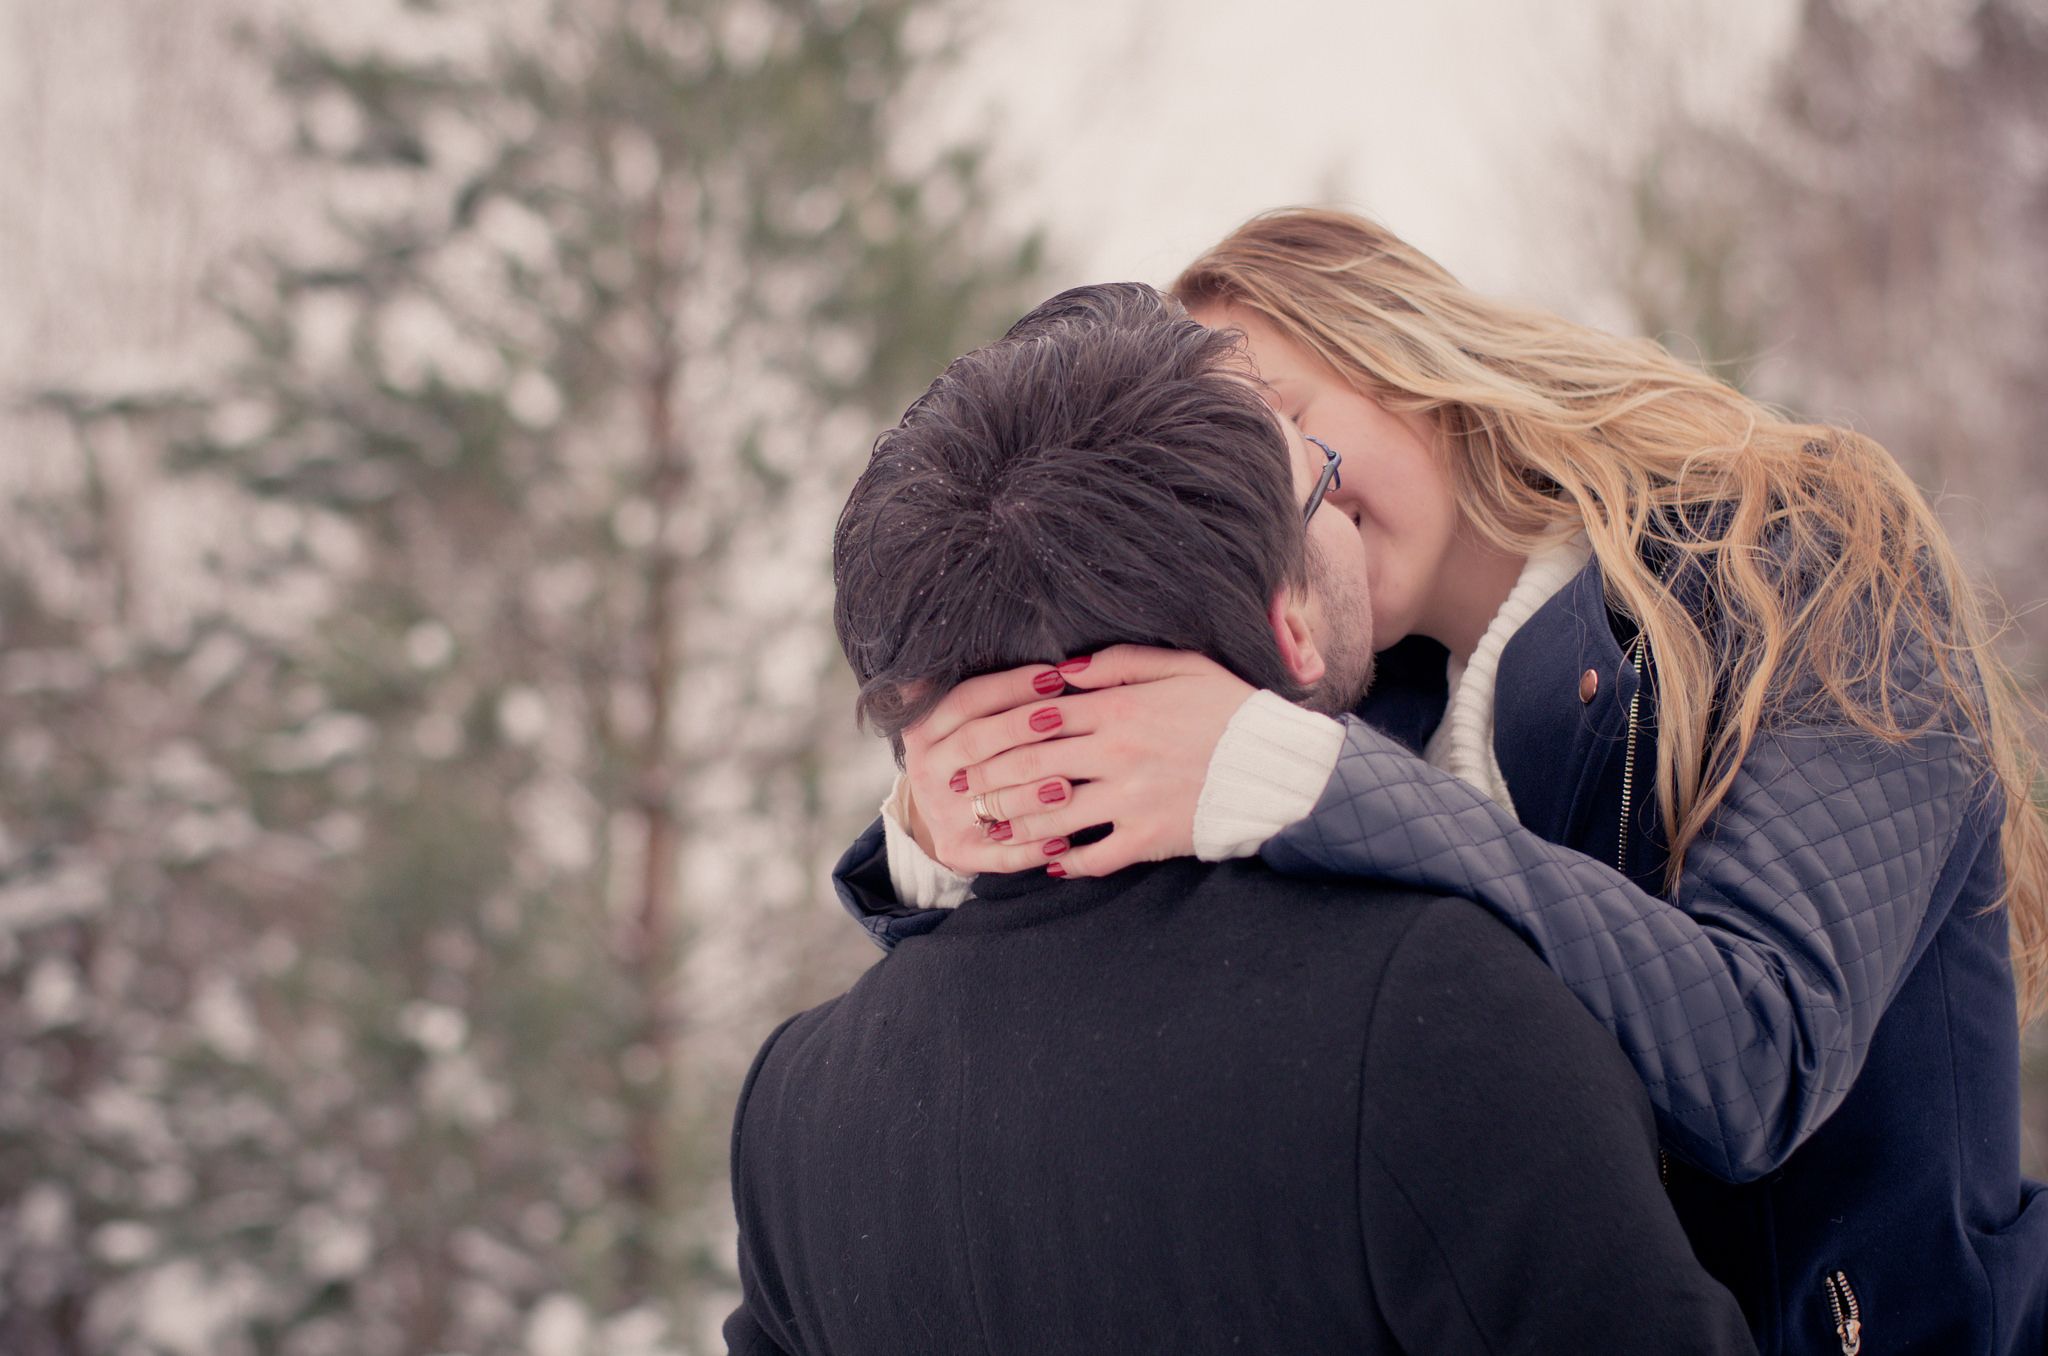 10 Amazing Things Only People Who Date Their Best Friend Would Understand